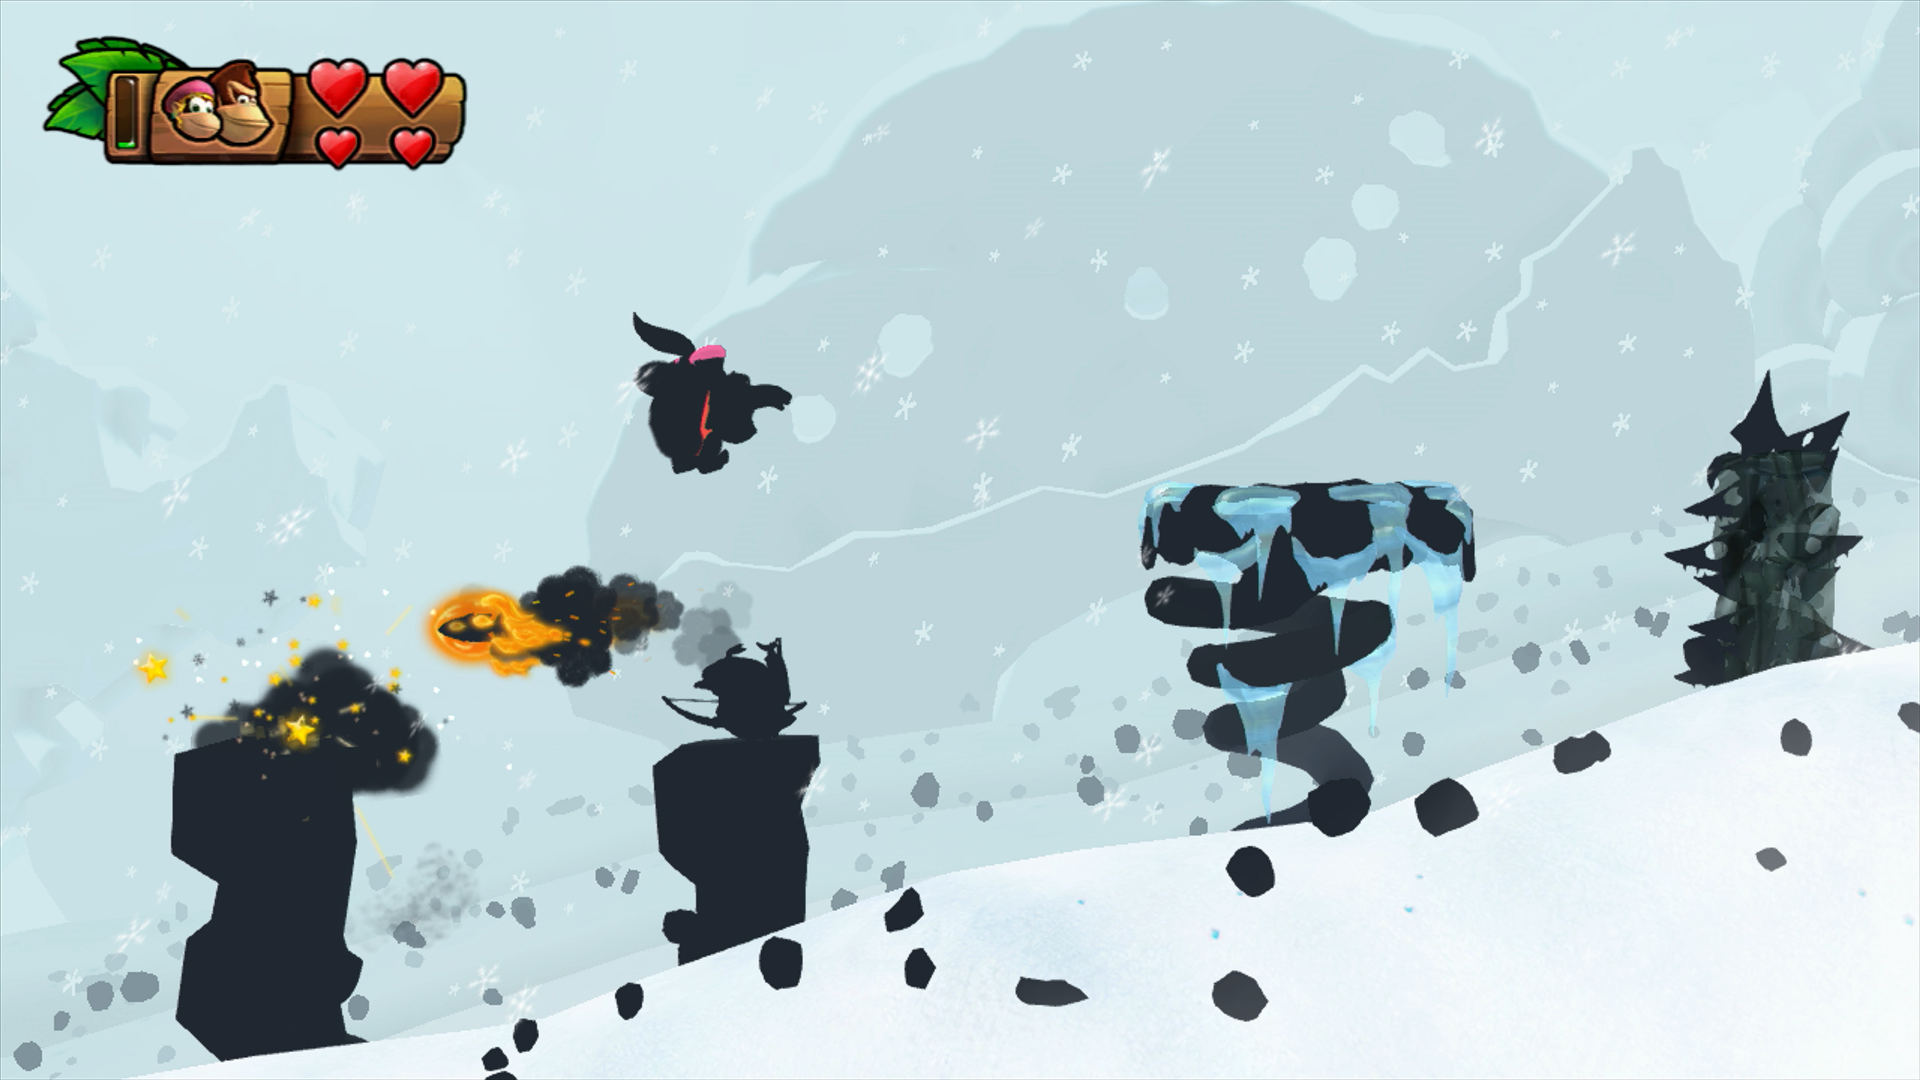 Donkey and Dixiedoing platforming up a snowy mountain, with only shadows of the charaters being visible